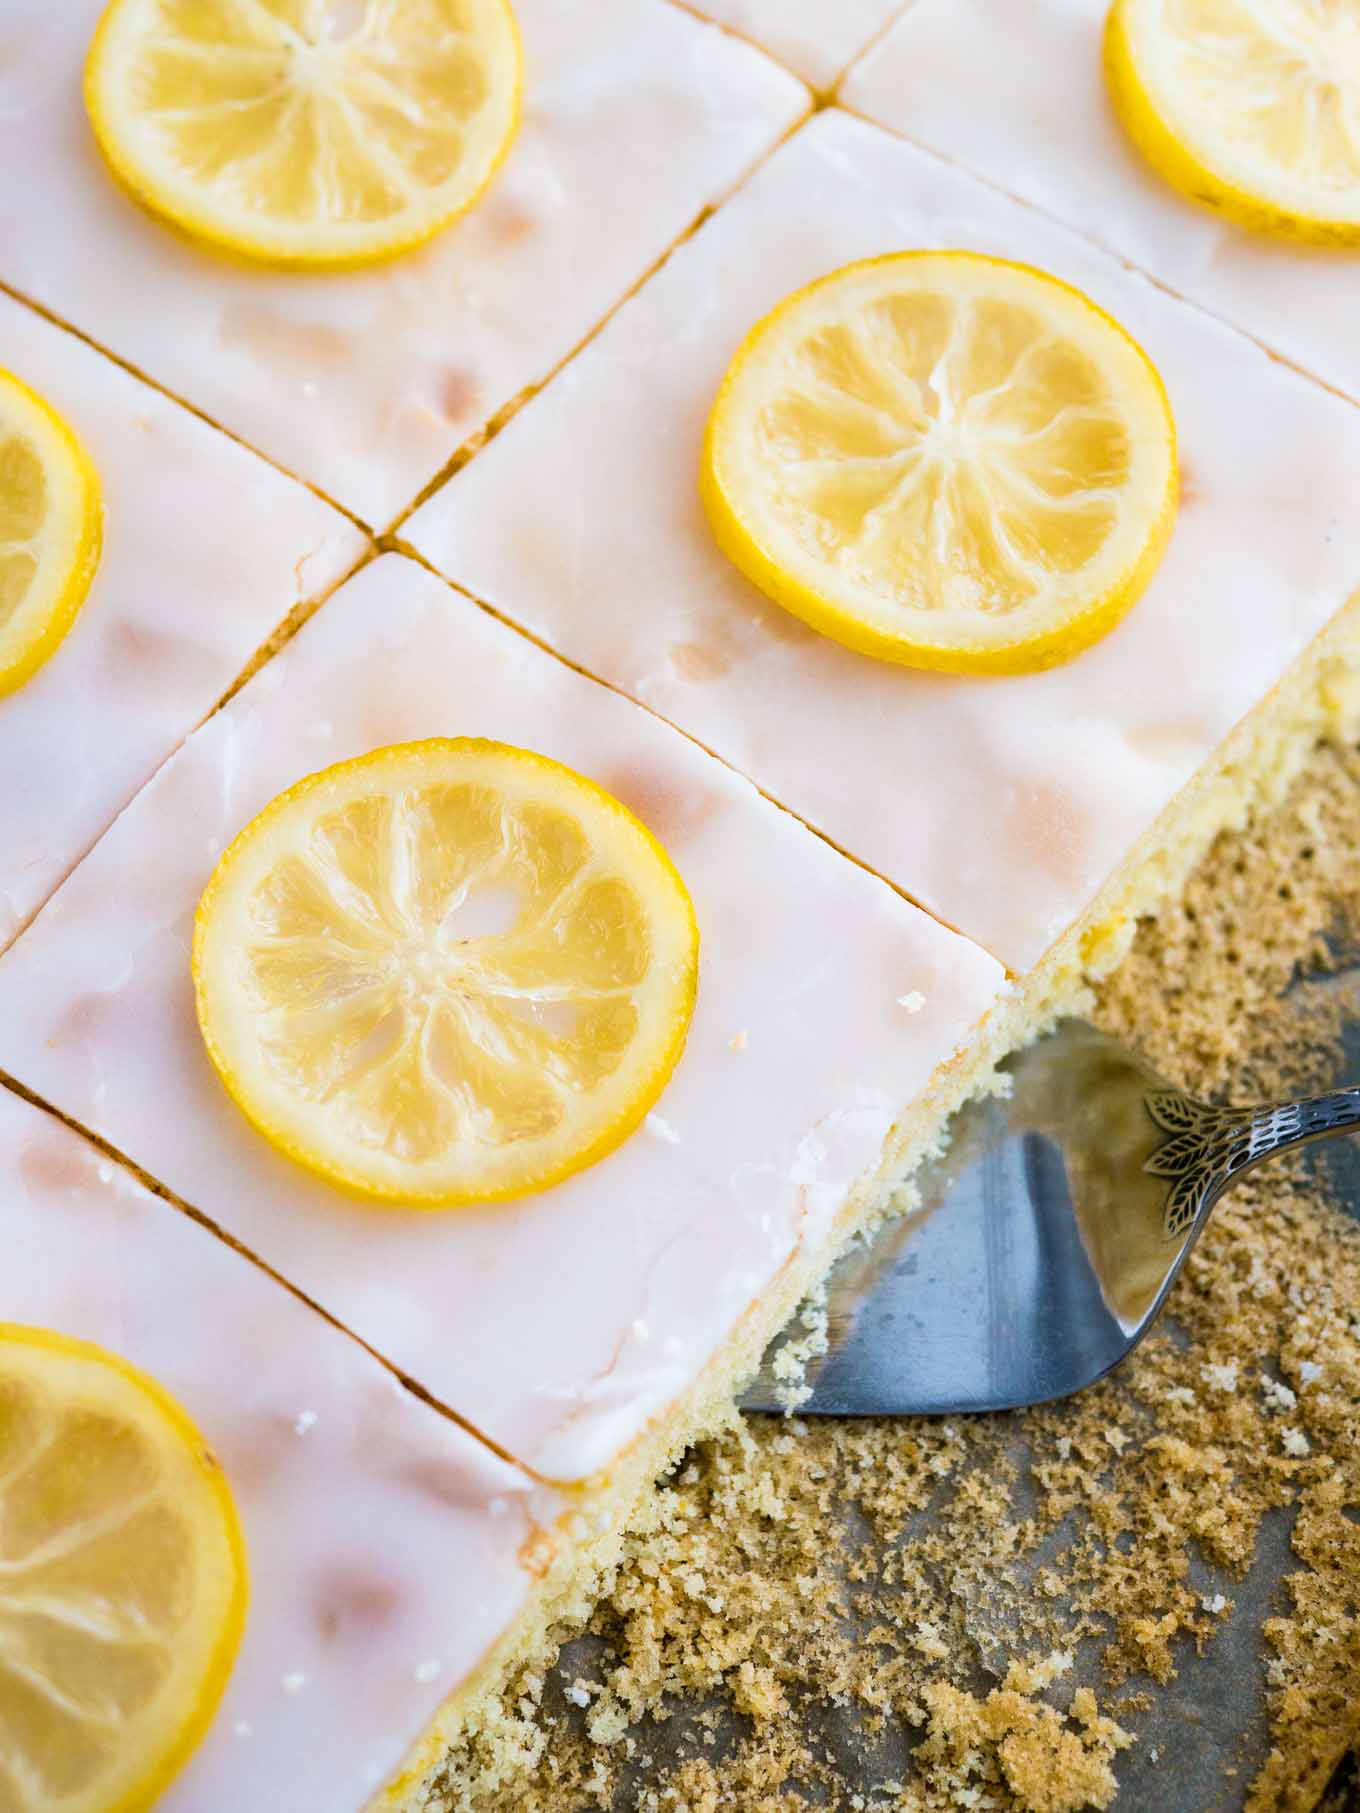 An easy lemon sheet cake recipe that is made in a 9x13-inch pan and has a delicious simple lemon glaze on top. This lemon cake tastes even better on the next day!